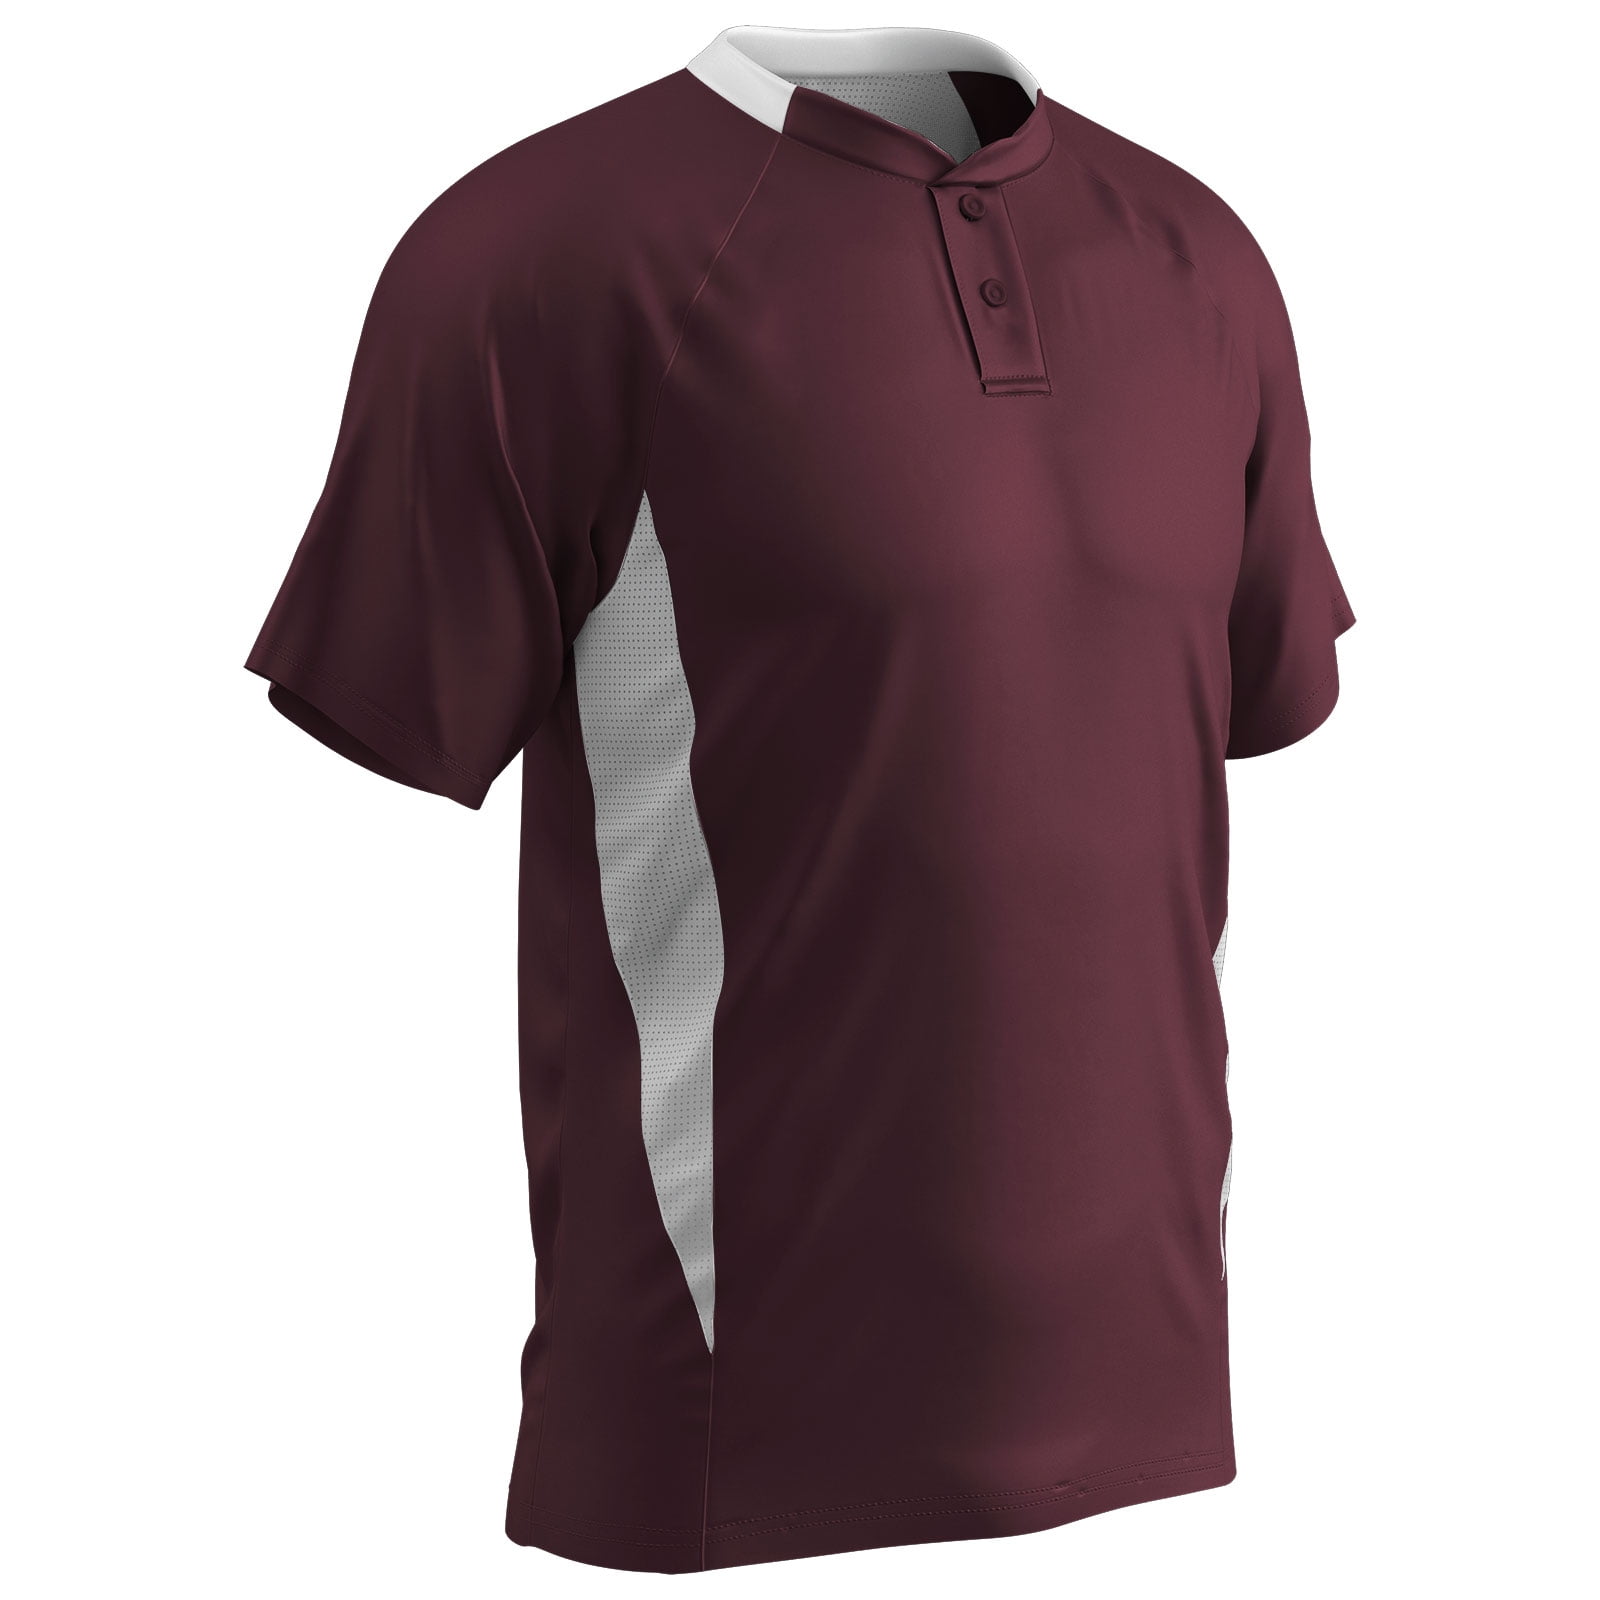 Clean-Up 2-Button Baseball Jersey, Adult Small, Maroon with White